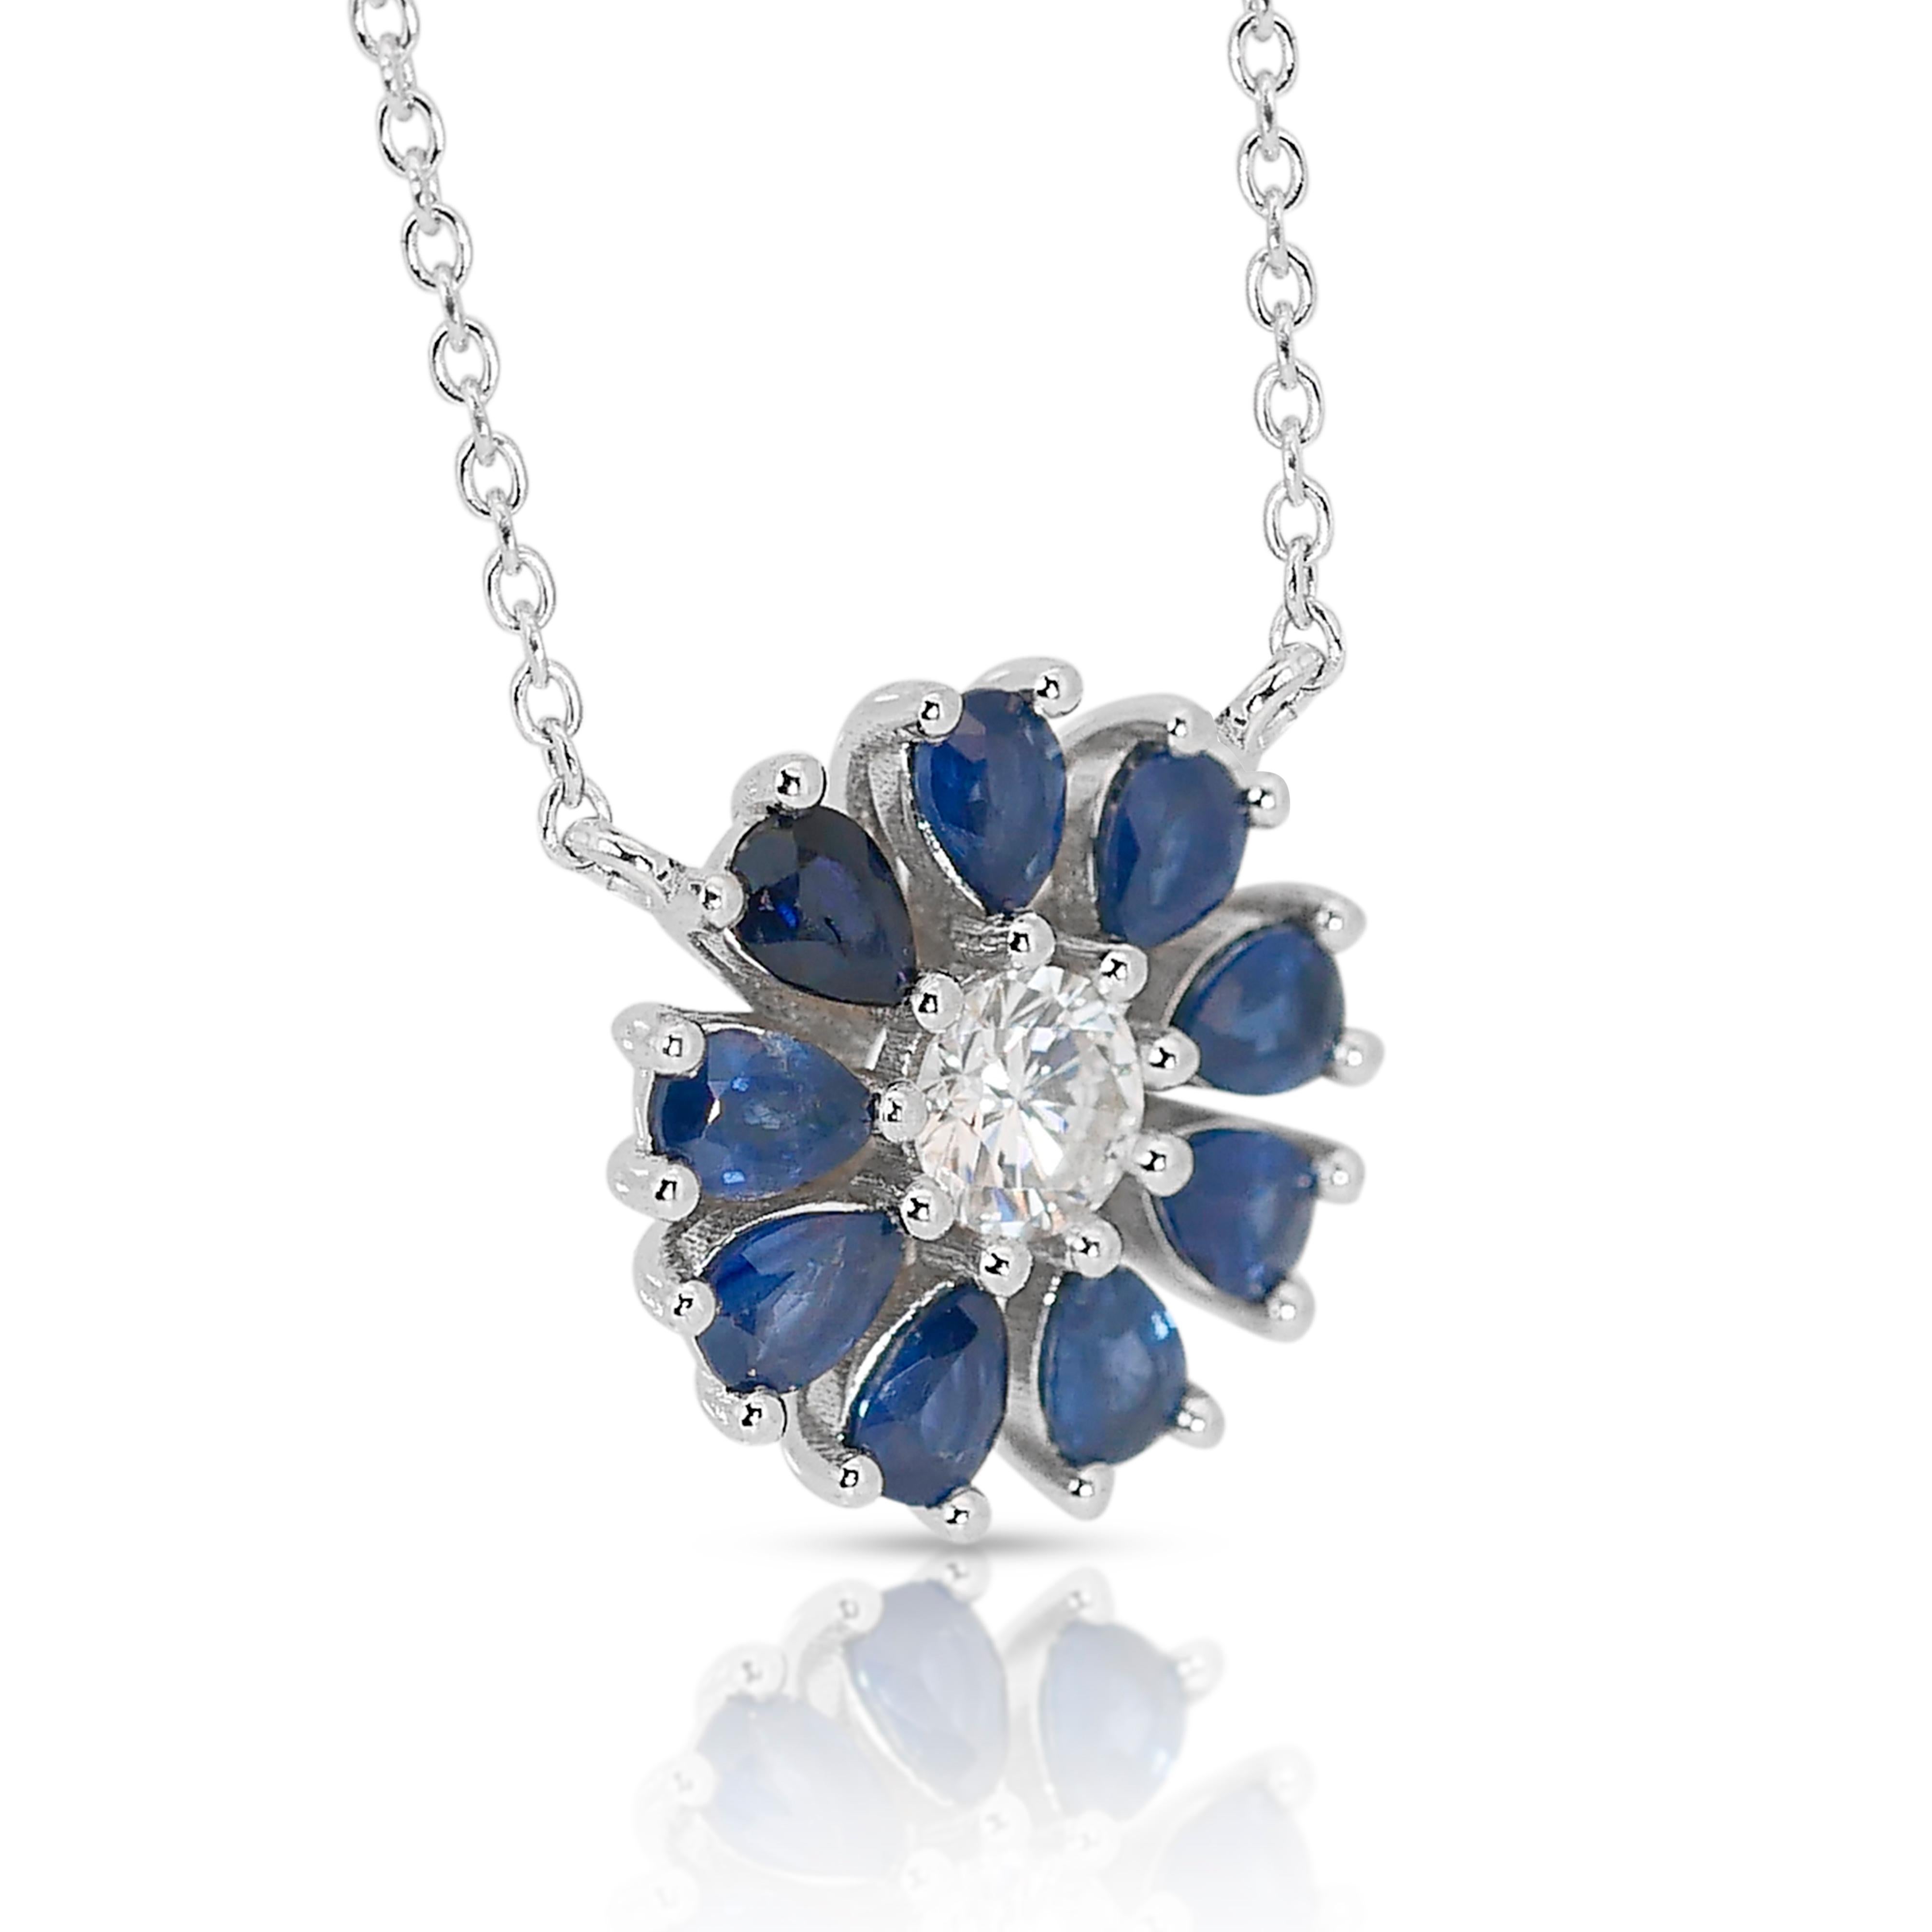 Enchanting 14k White Gold Natural Diamonds w/ Sapphires Necklace w/1.72 ct- IGI  In New Condition For Sale In רמת גן, IL